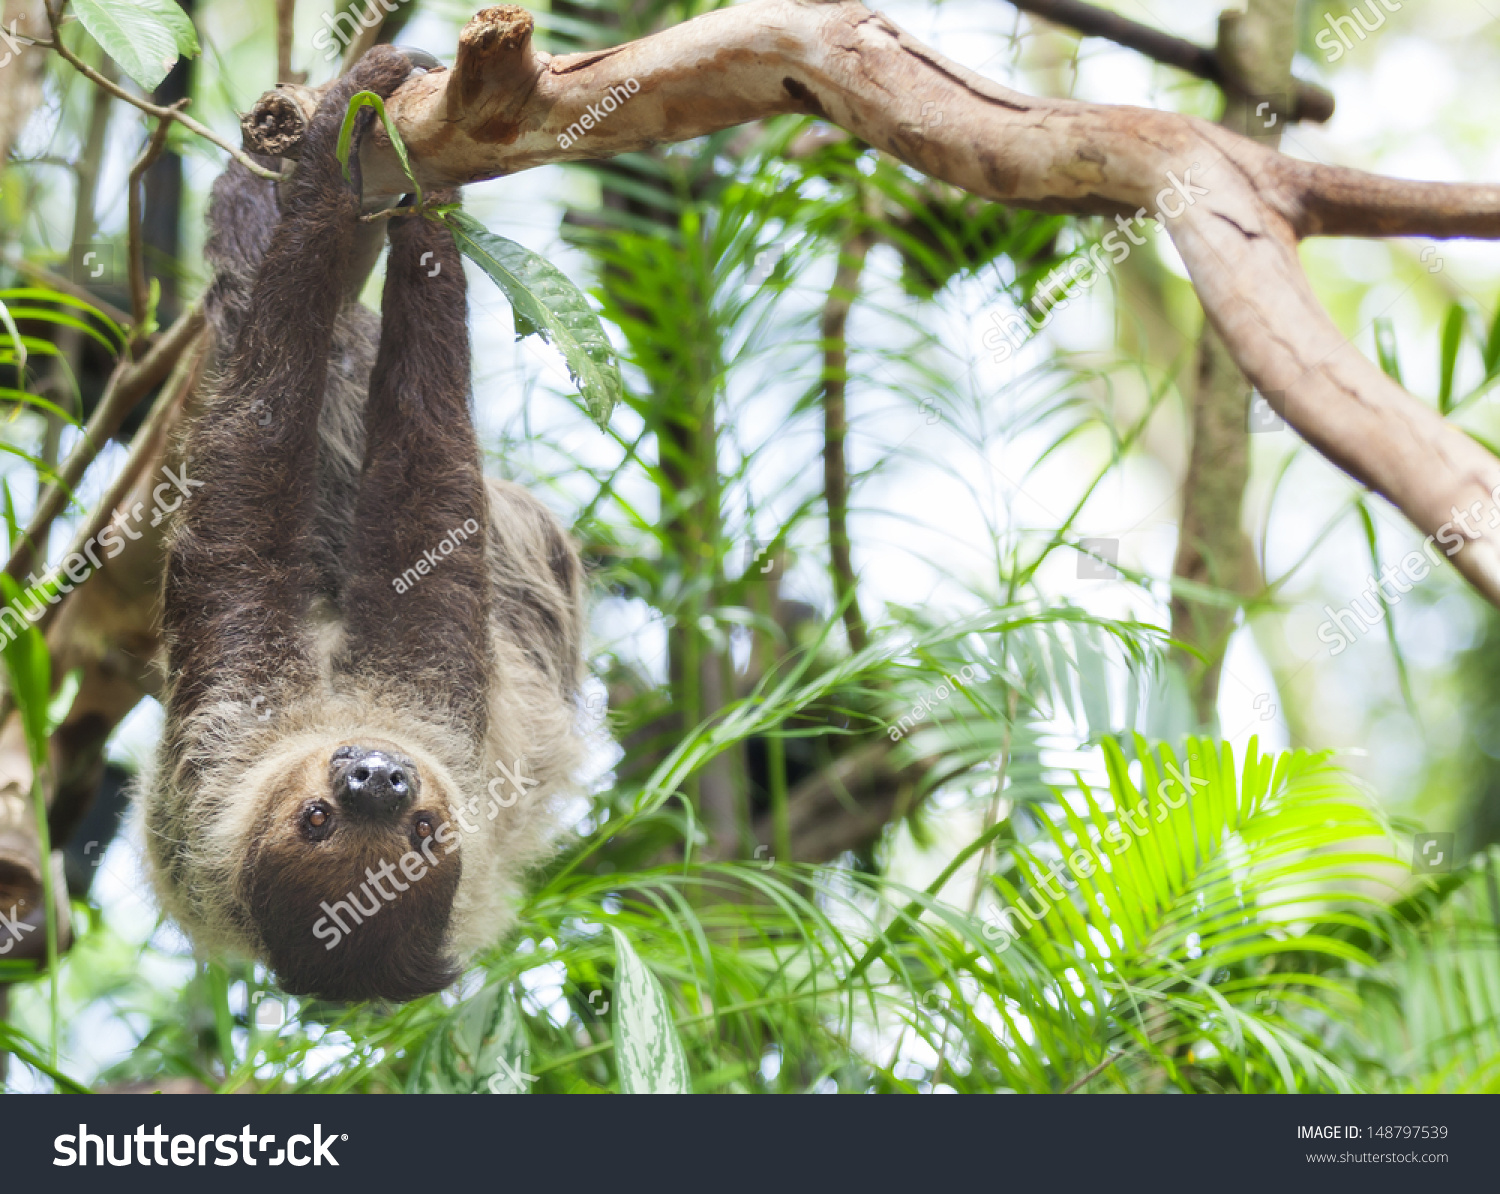 Three-toed Sloth in nature #148797539